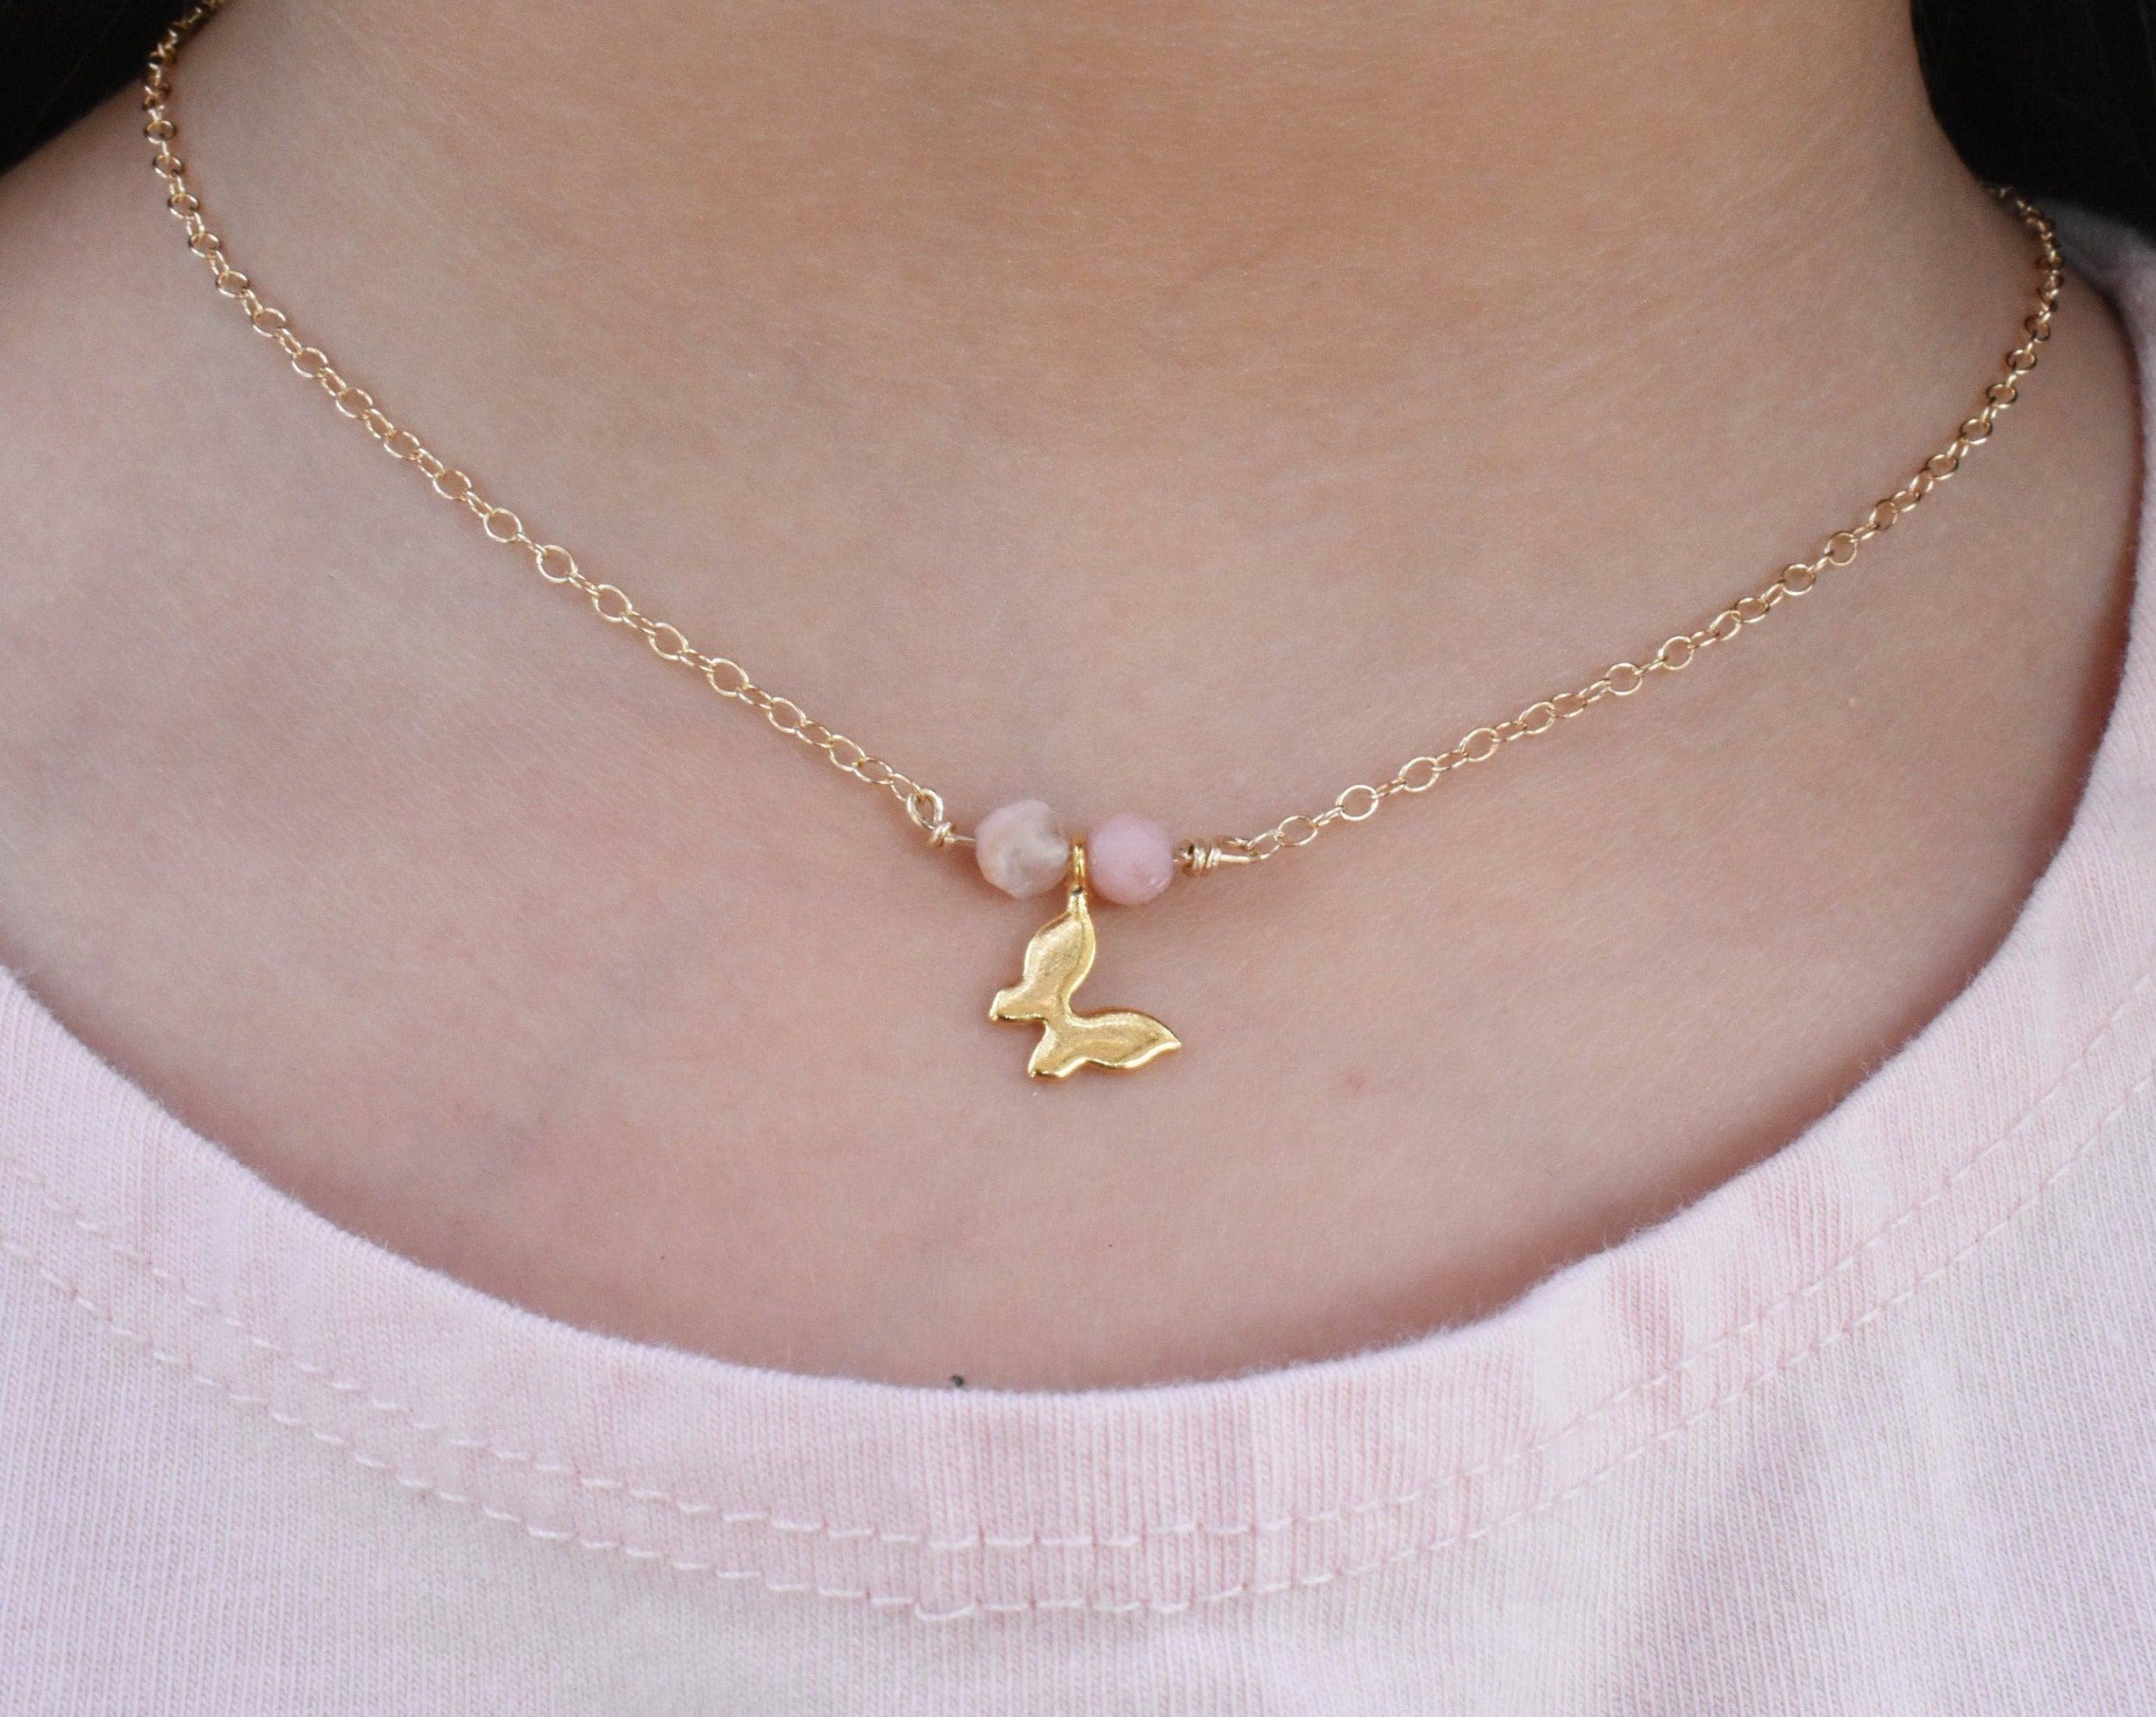 Dainty children's butterfly necklace with choice of pink opals or amethyst gemstones. This necklace is part of the children's collection. It features a gold-filled chain and your selection of semi precious healing gemstone crystals that are ideal for children for their soothing energy.